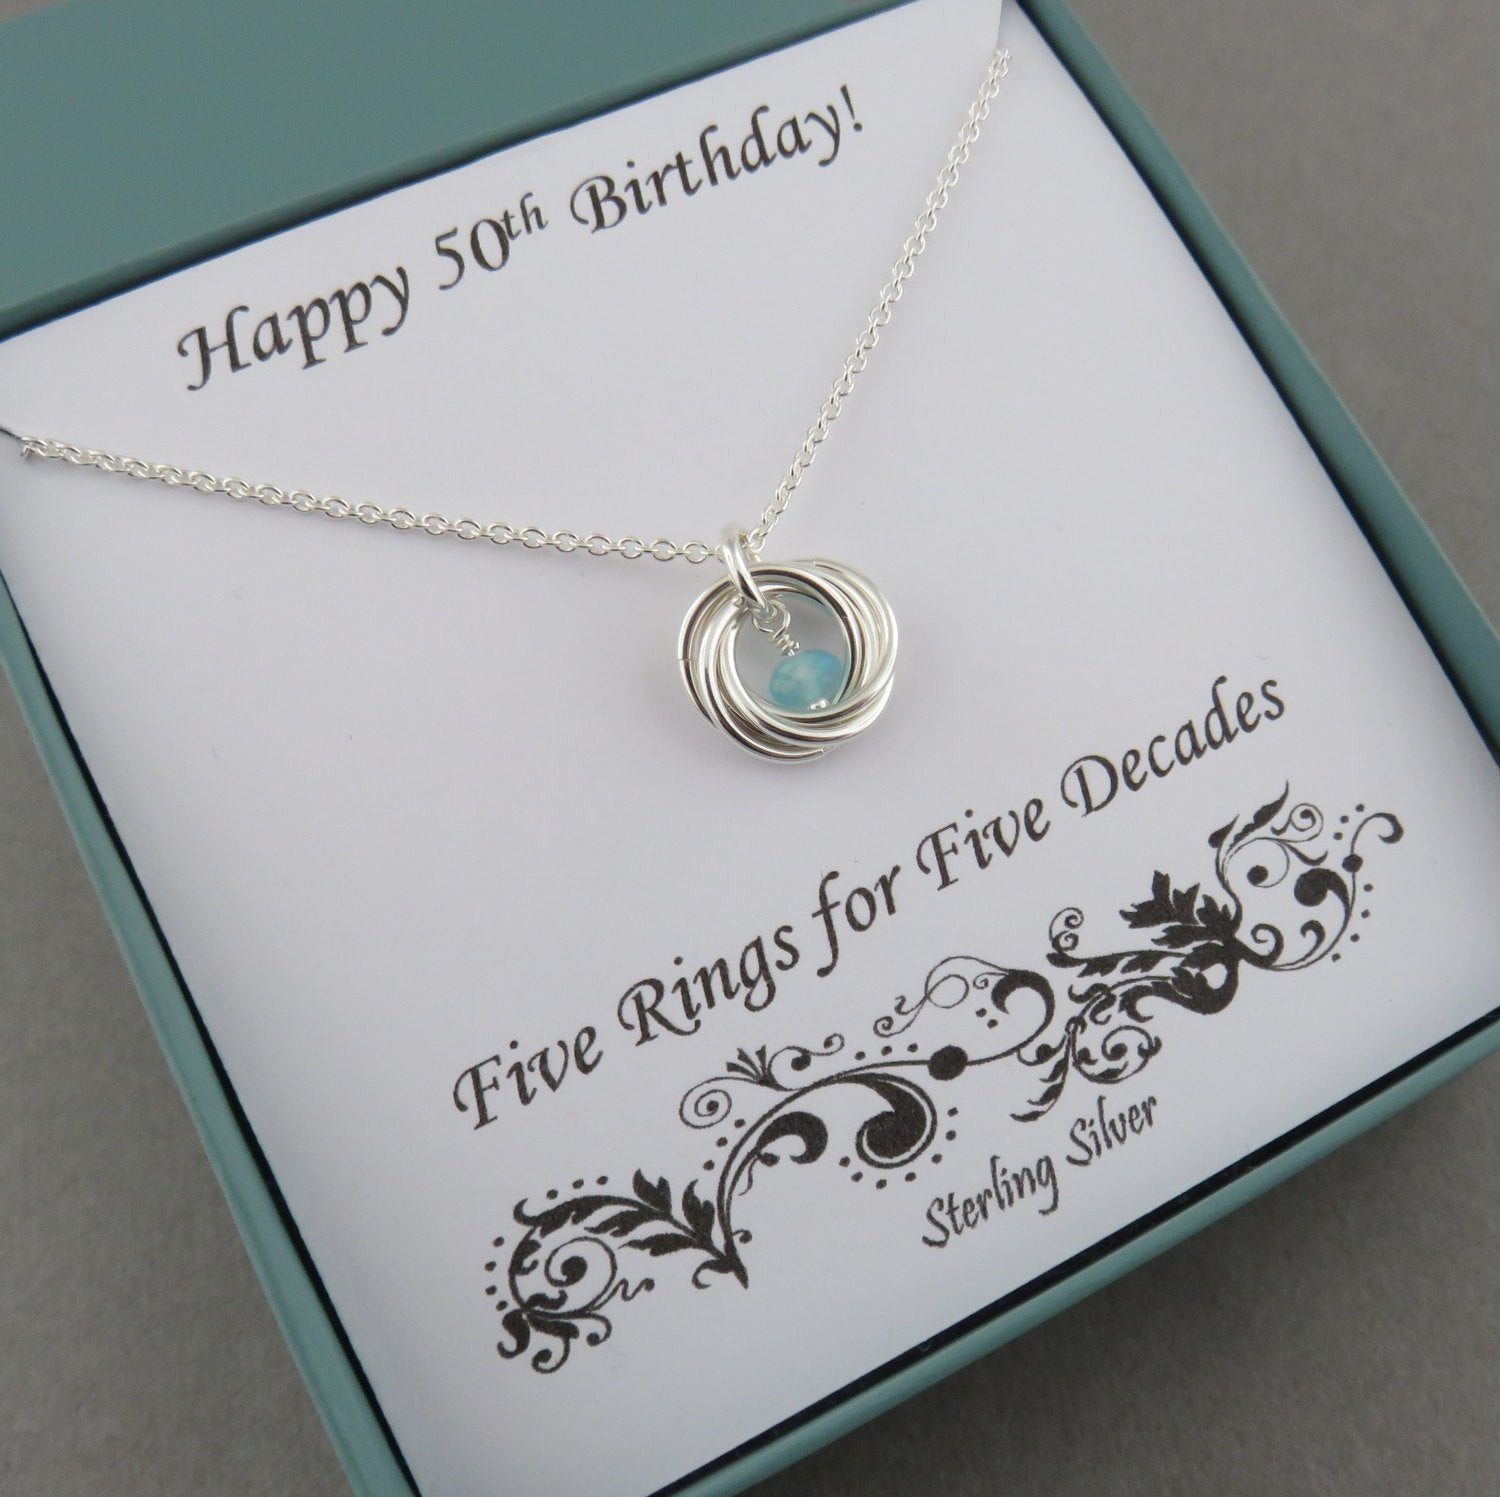 Gift Ideas For 50Th Birthday Woman
 50th Birthday Gift for Women Birthstone Necklace Sterling